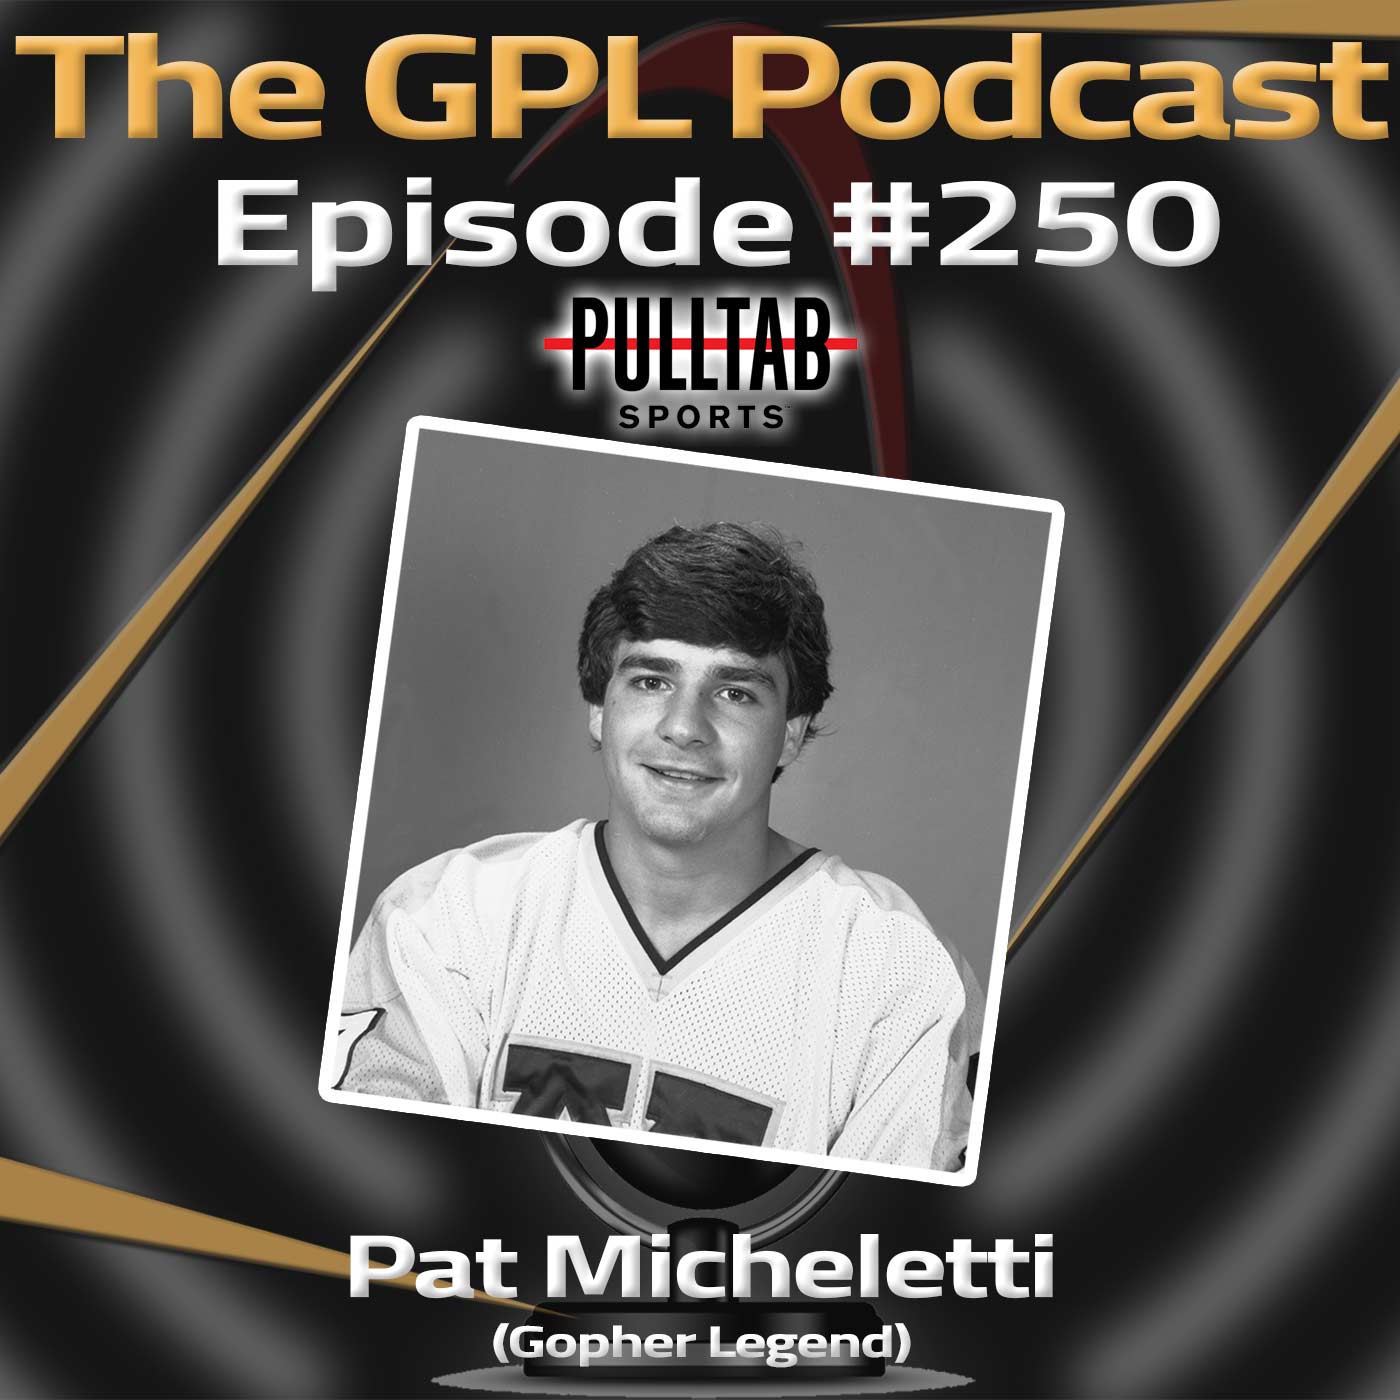 #250: Pat Micheletti joins us for our 250th show